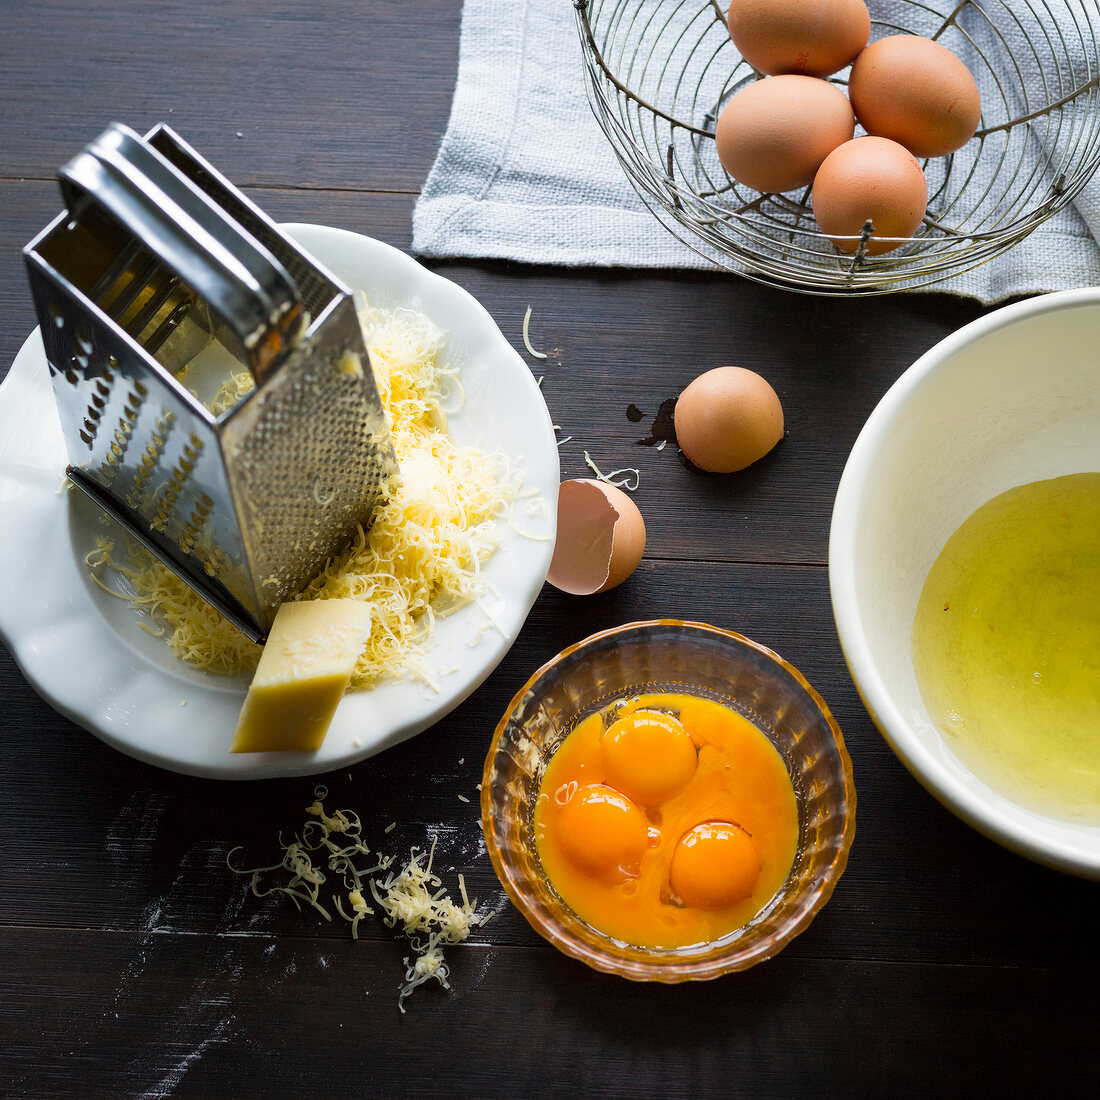 Grated cheese, separate eggs, grater on plate over wooden surface